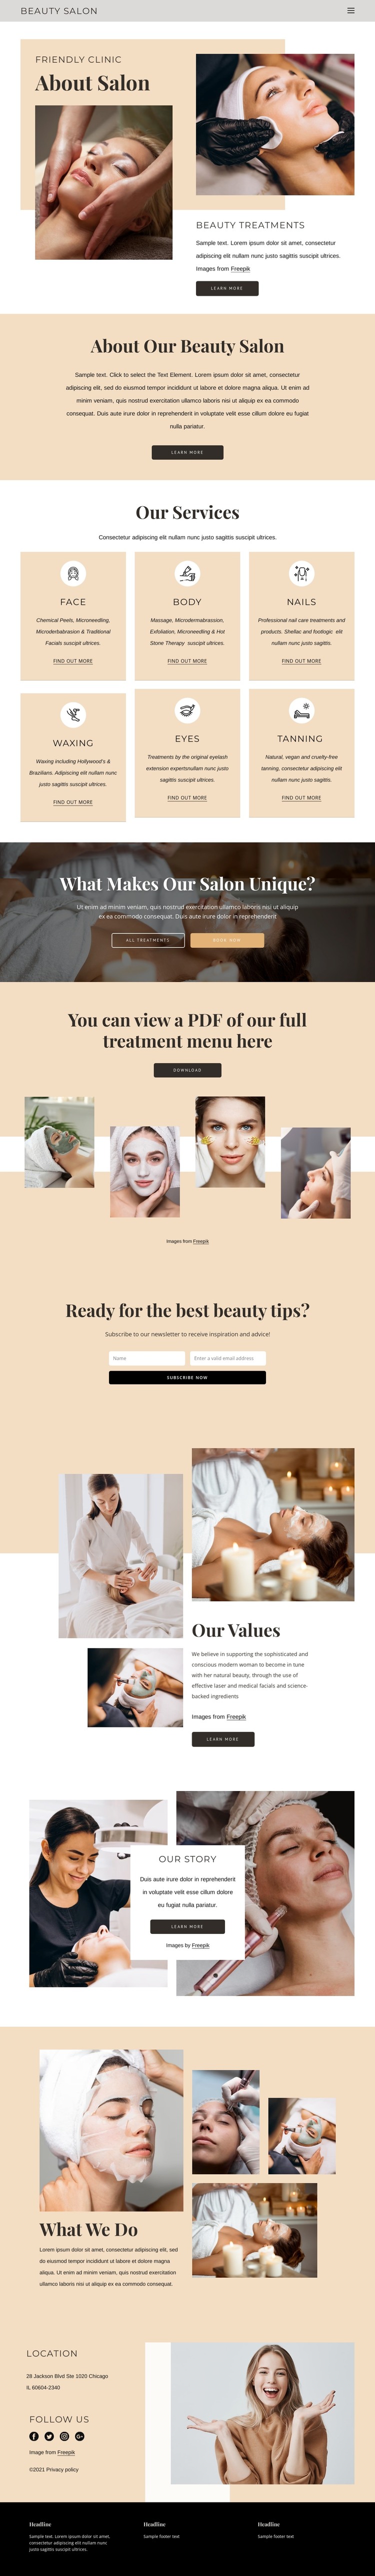 Beauty and aesthetic treatments Web Design